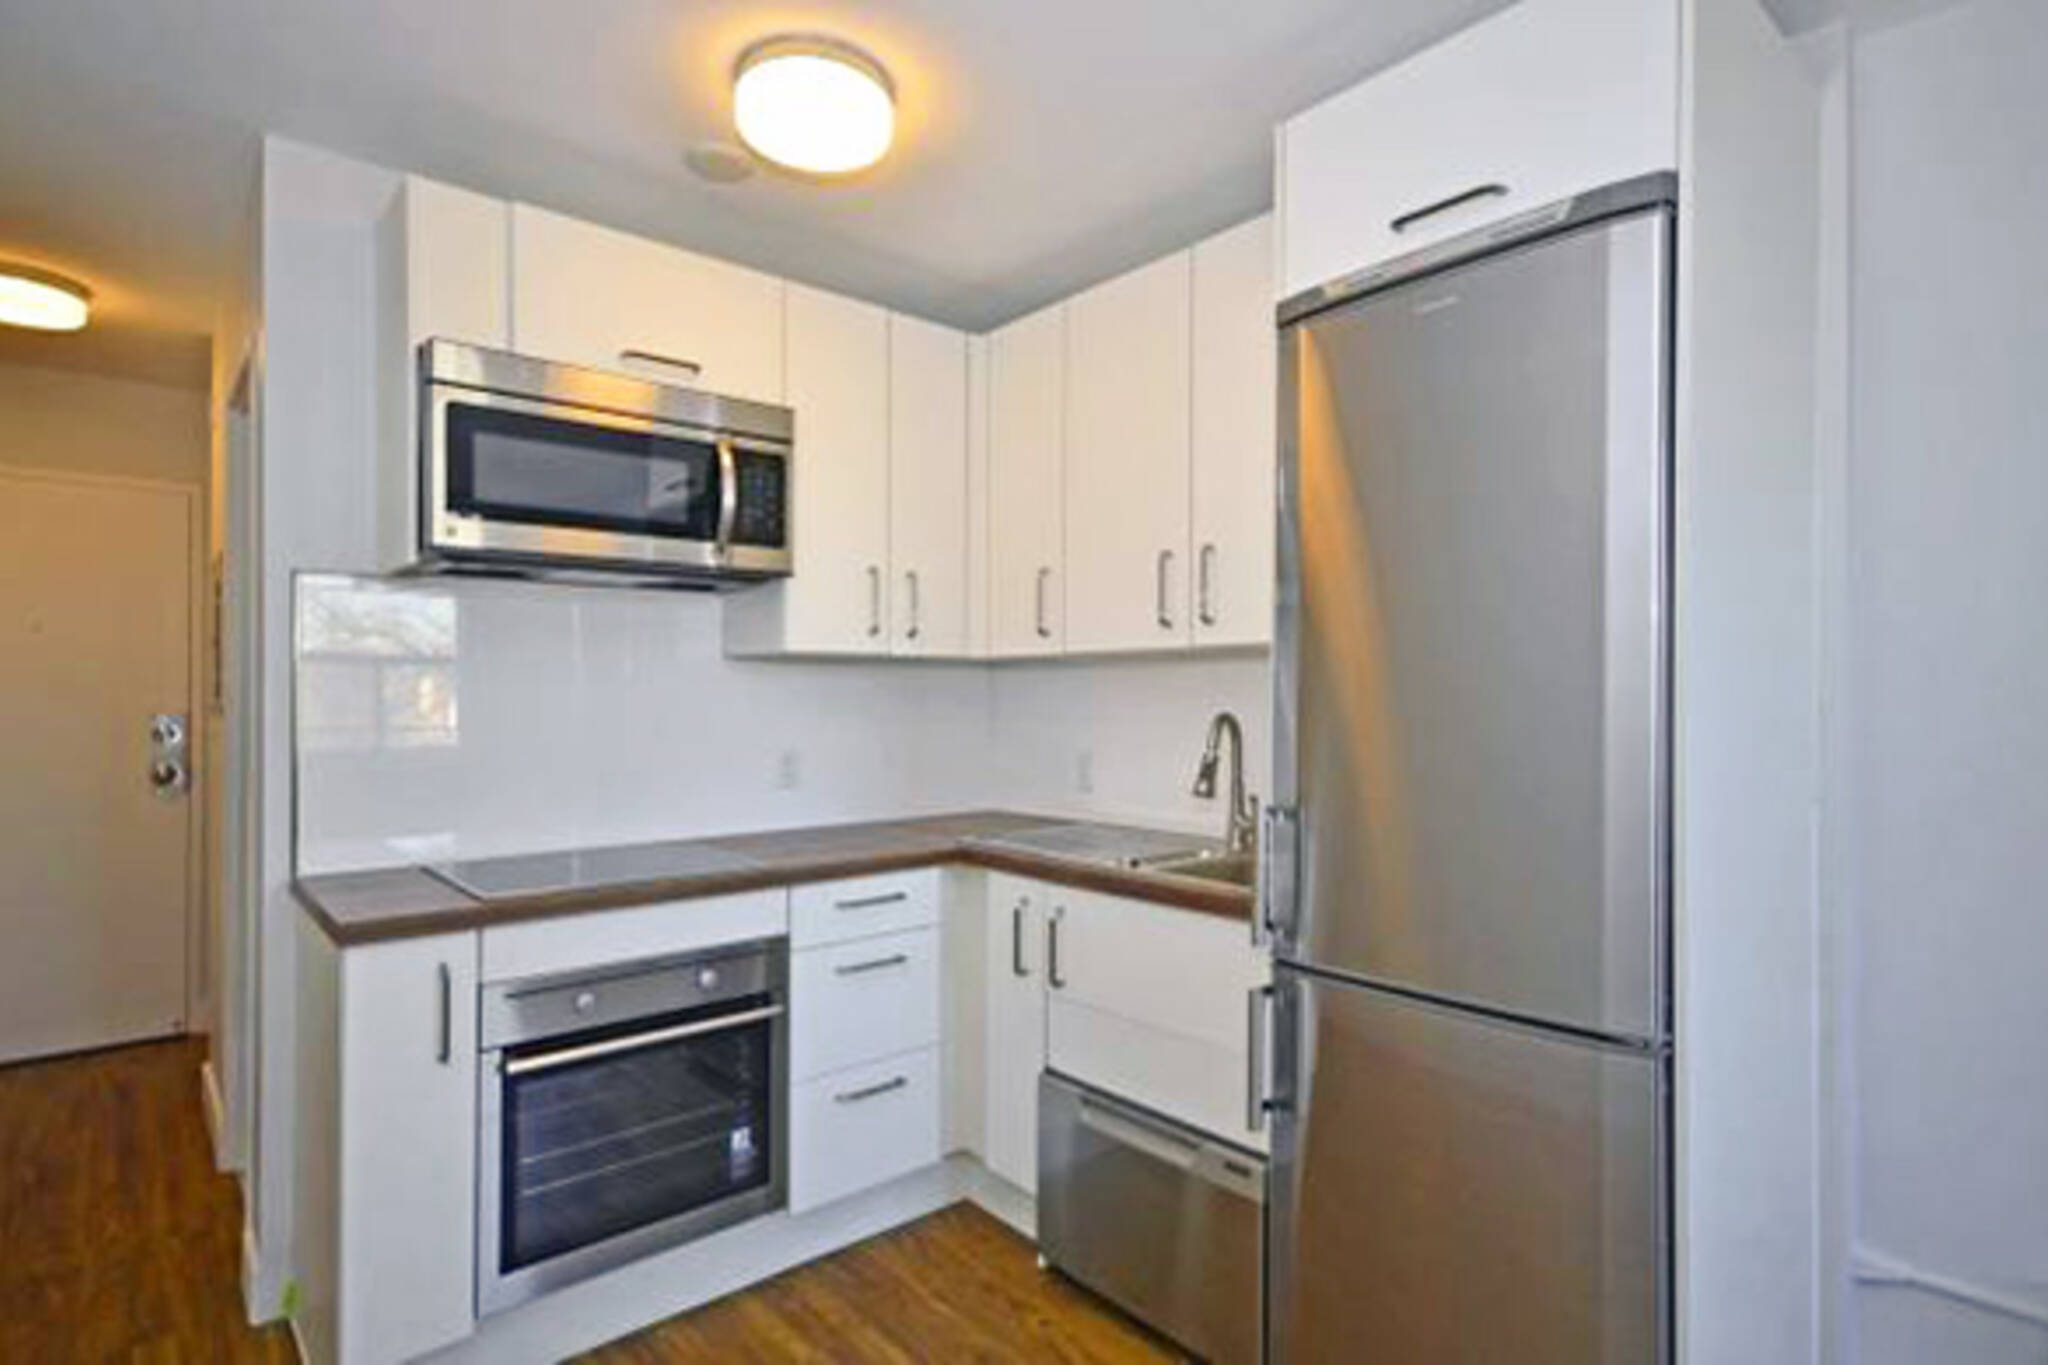 What kind of apartment does $1000 get you in Toronto?